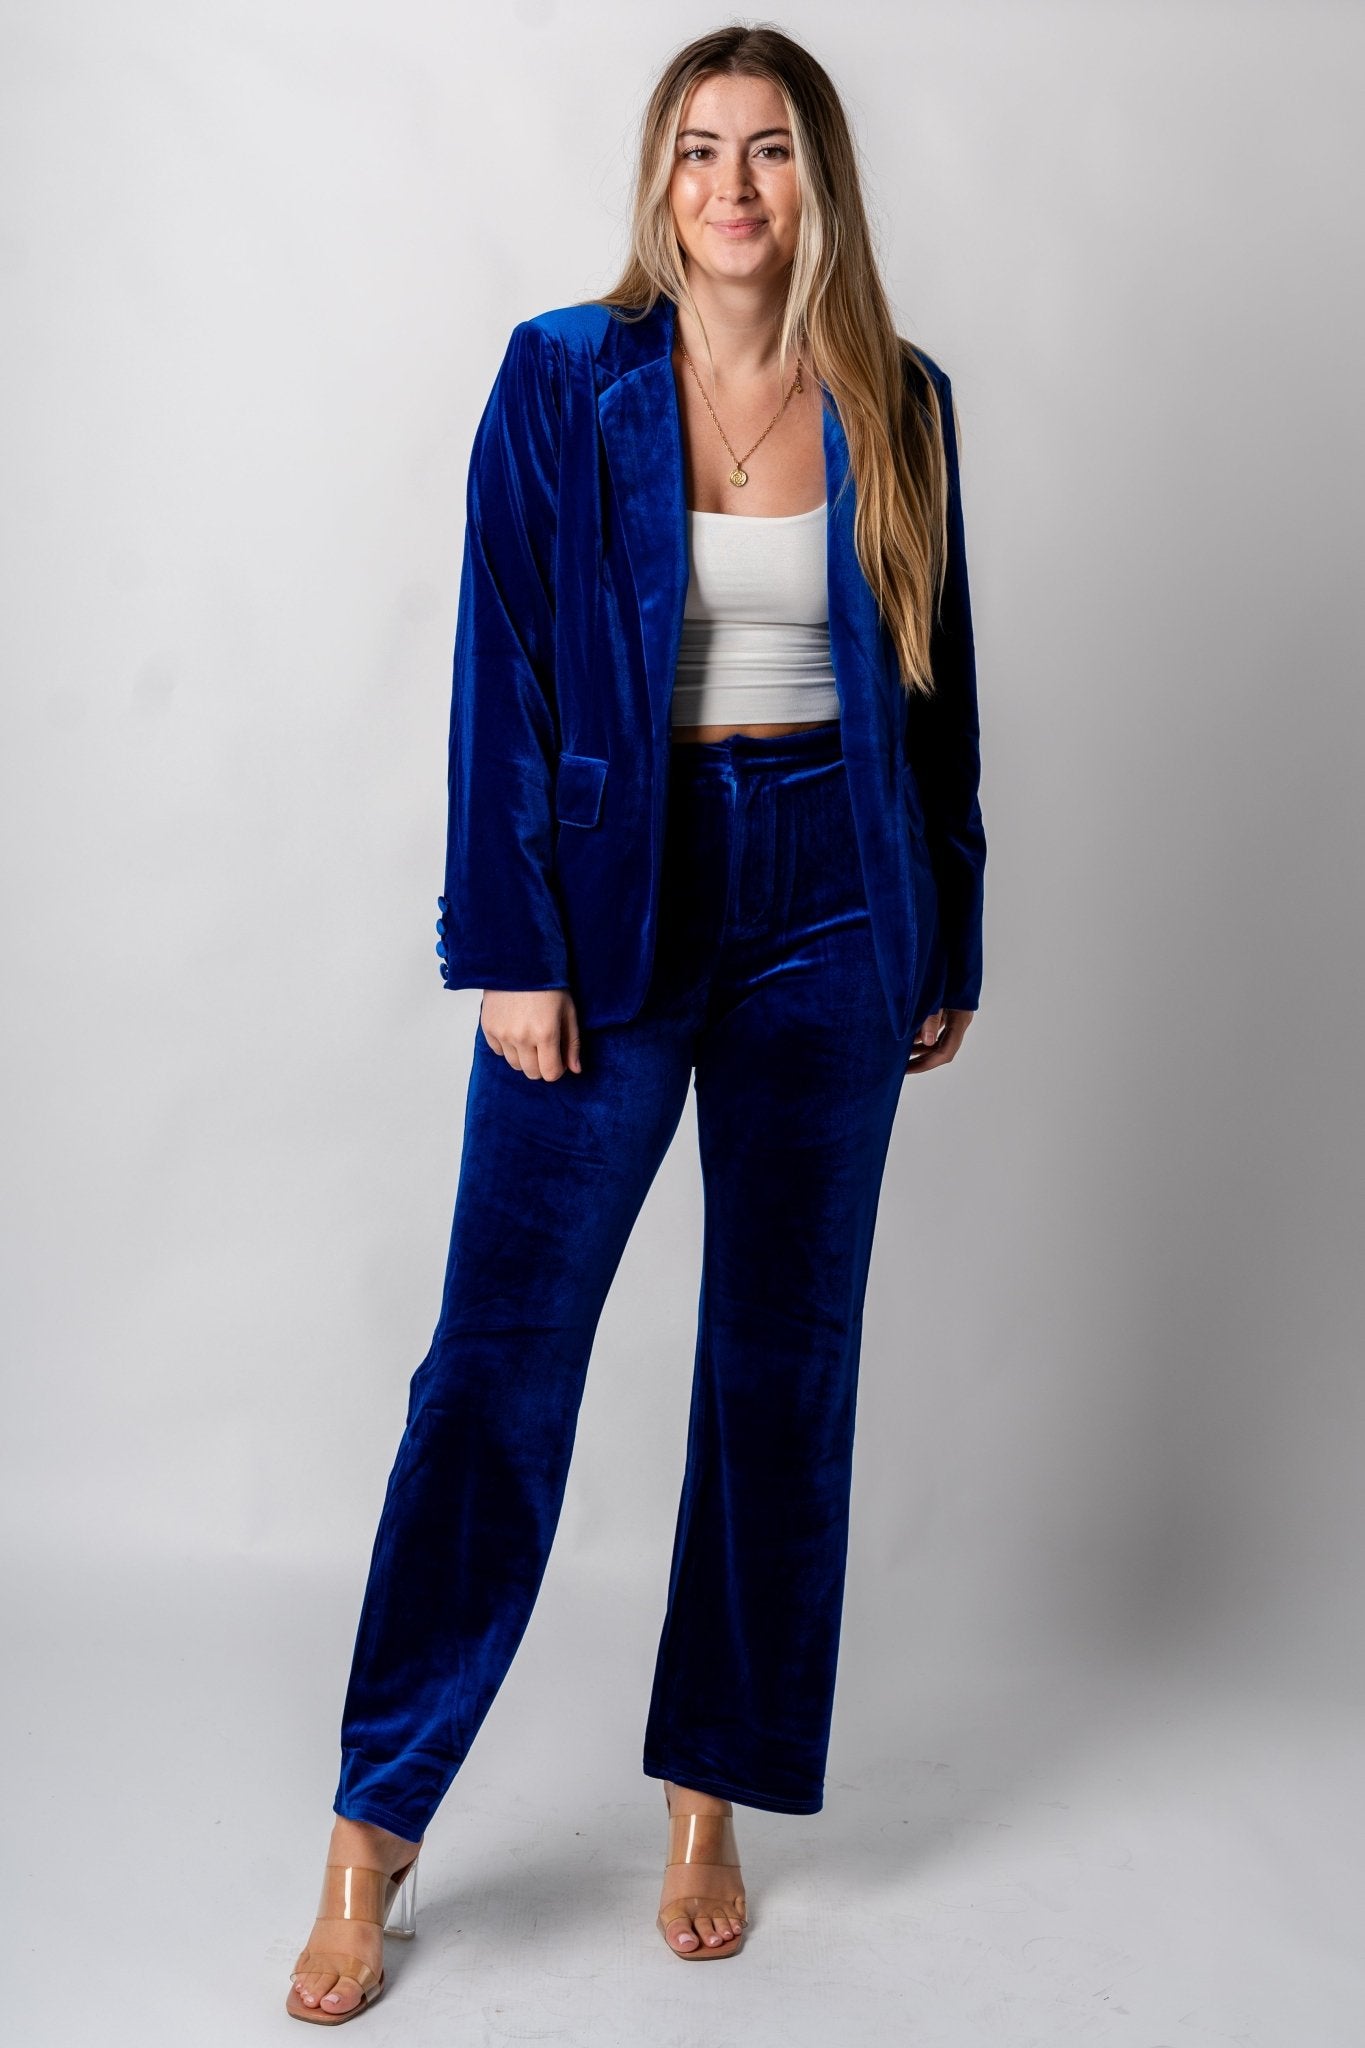 High waist wide leg velvet pants royal blue - Affordable New Year's Eve Party Outfits at Lush Fashion Lounge Boutique in Oklahoma City